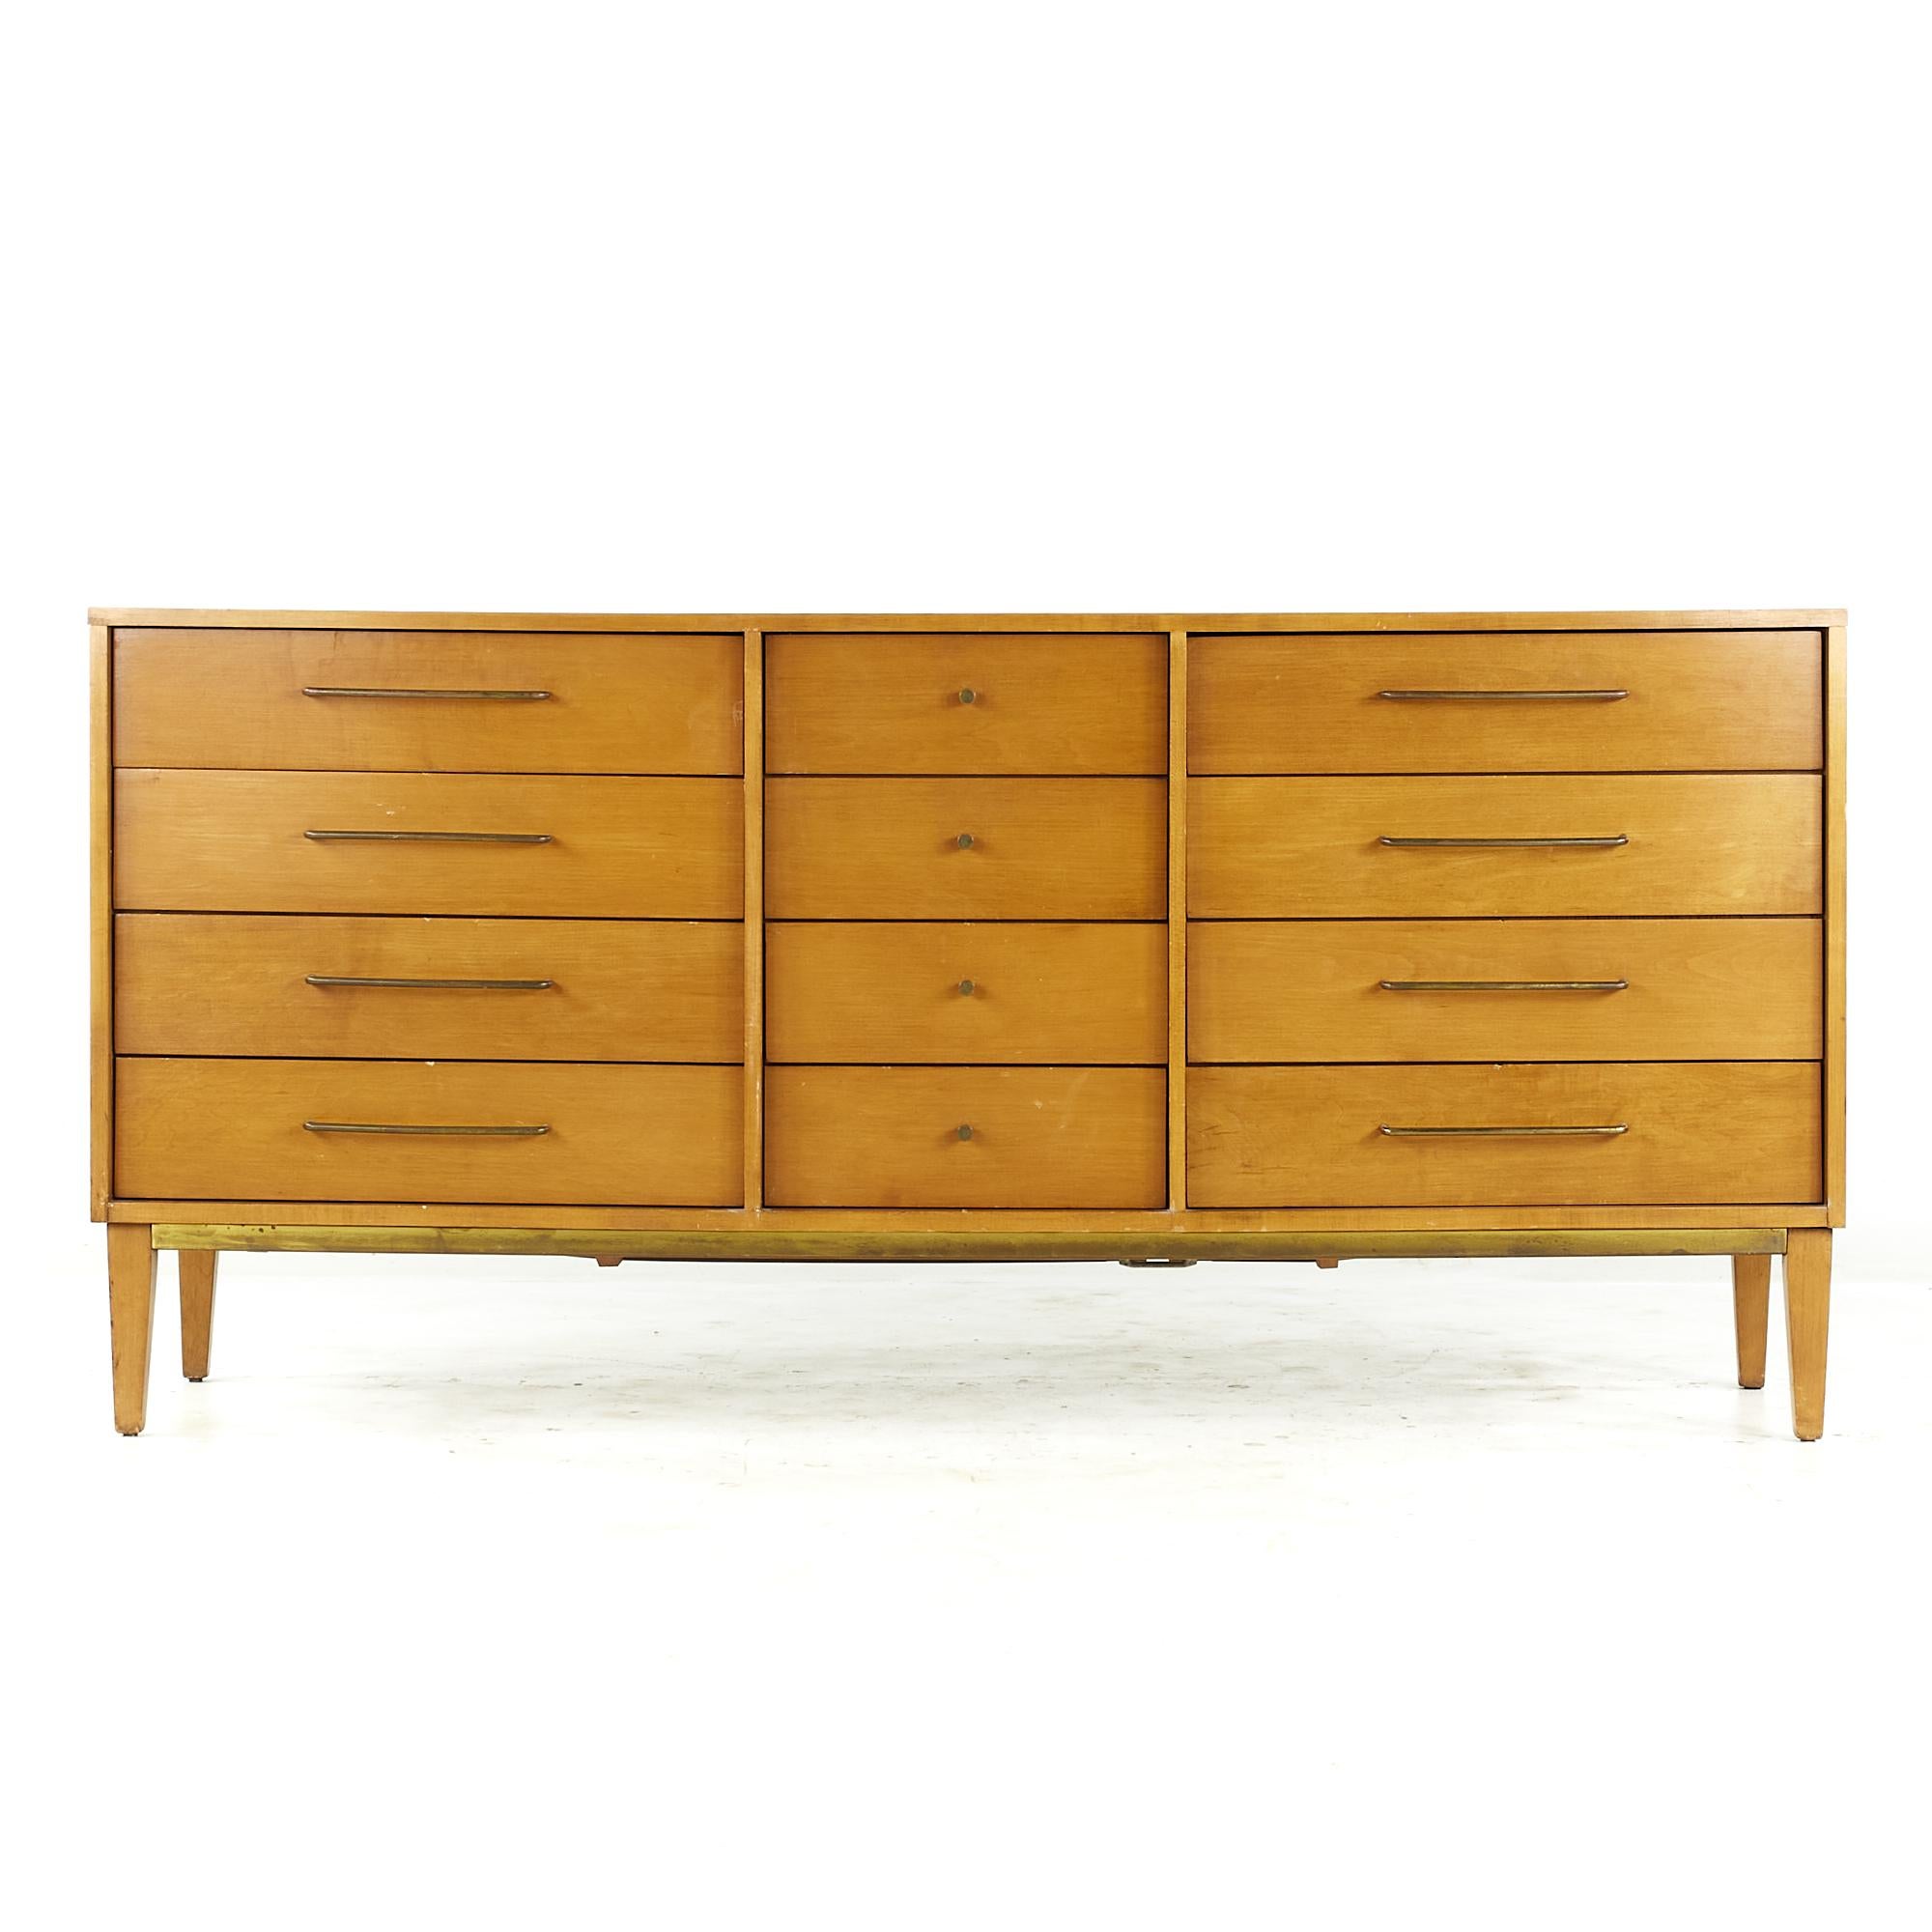 Milo Baughman for Murray mid-century Maple and Brass Lowboy Dresser
This lowboy measures: 66 wide x 18 deep x 31.5 inches high
All pieces of furniture can be had in what we call restored vintage condition. That means the piece is restored upon